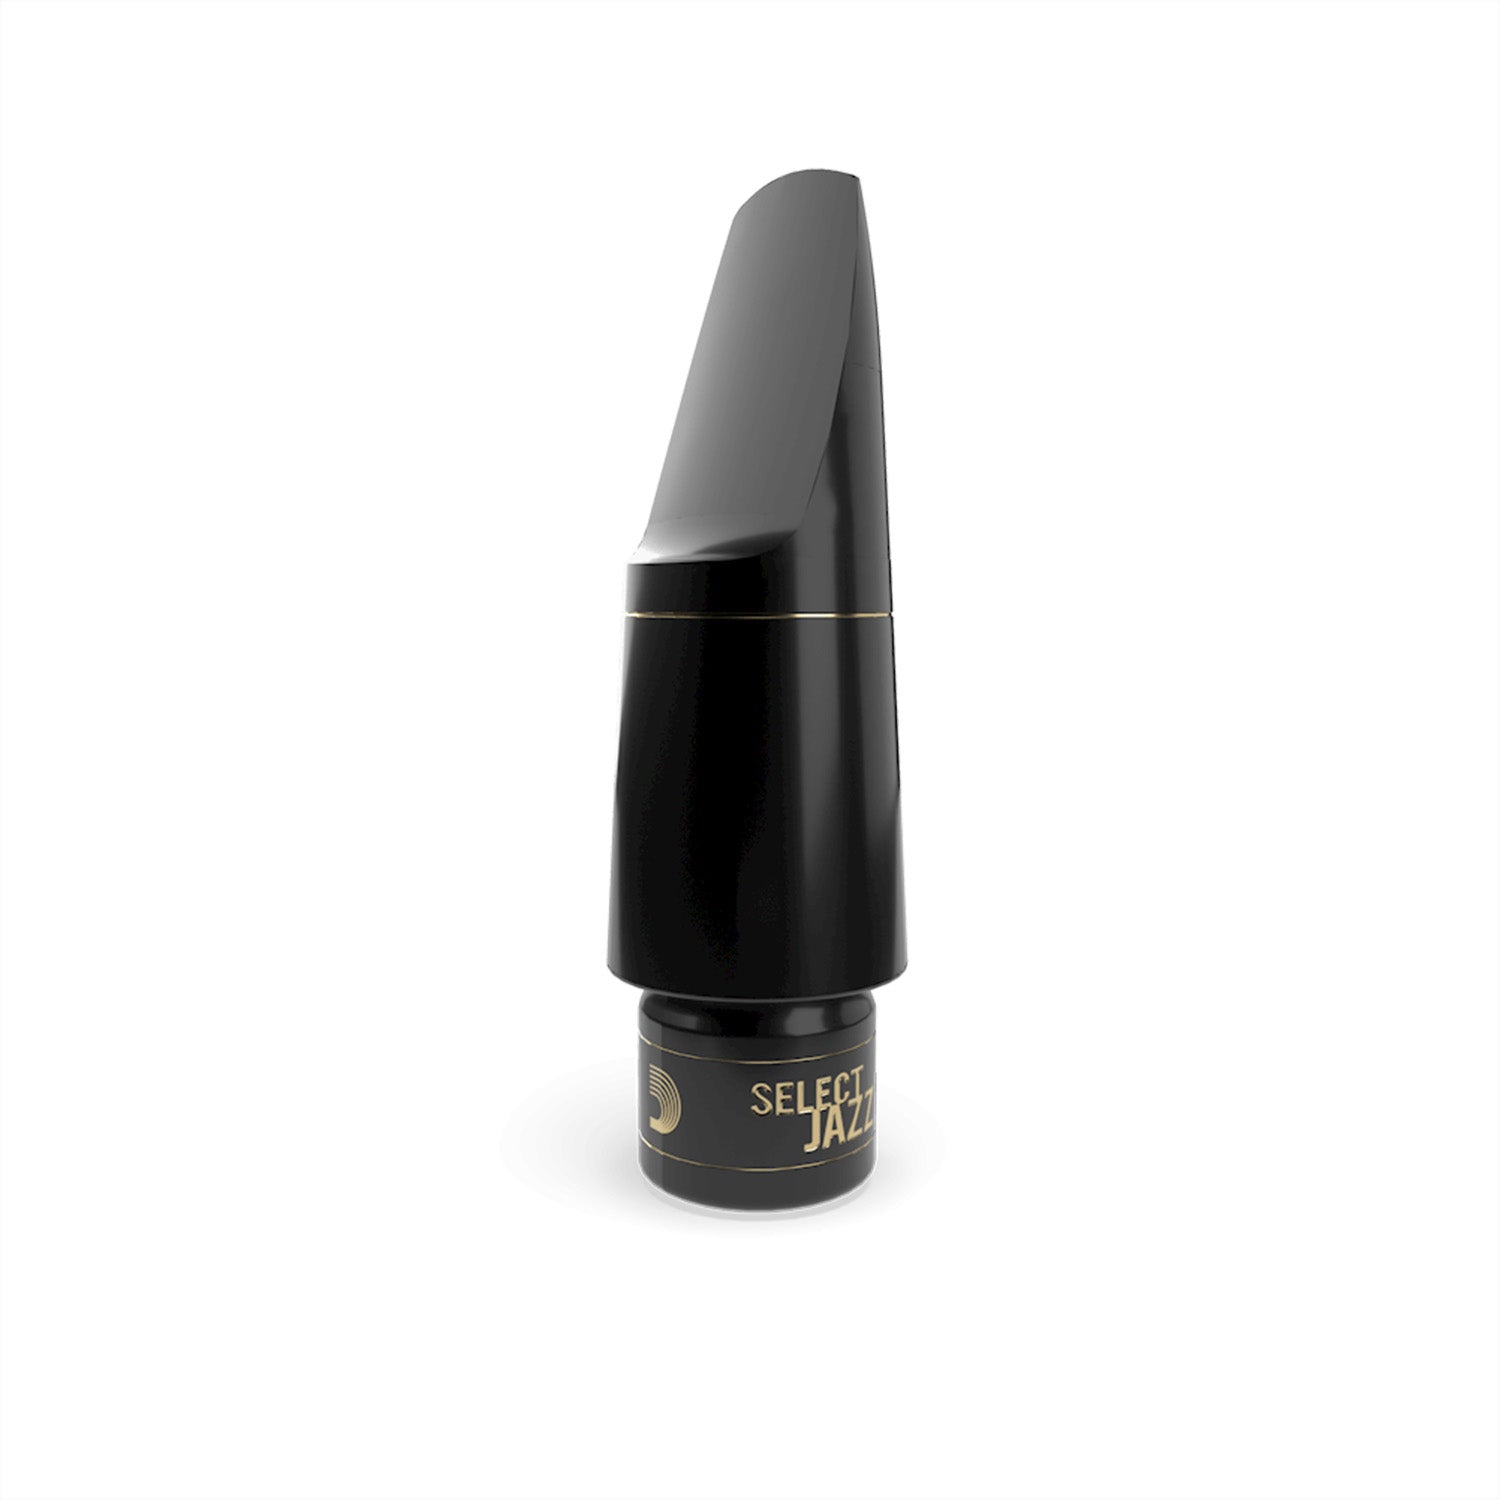 Angled frontal photo of D'addario Select Jazz Tenor Sax mouthpiece on a white background